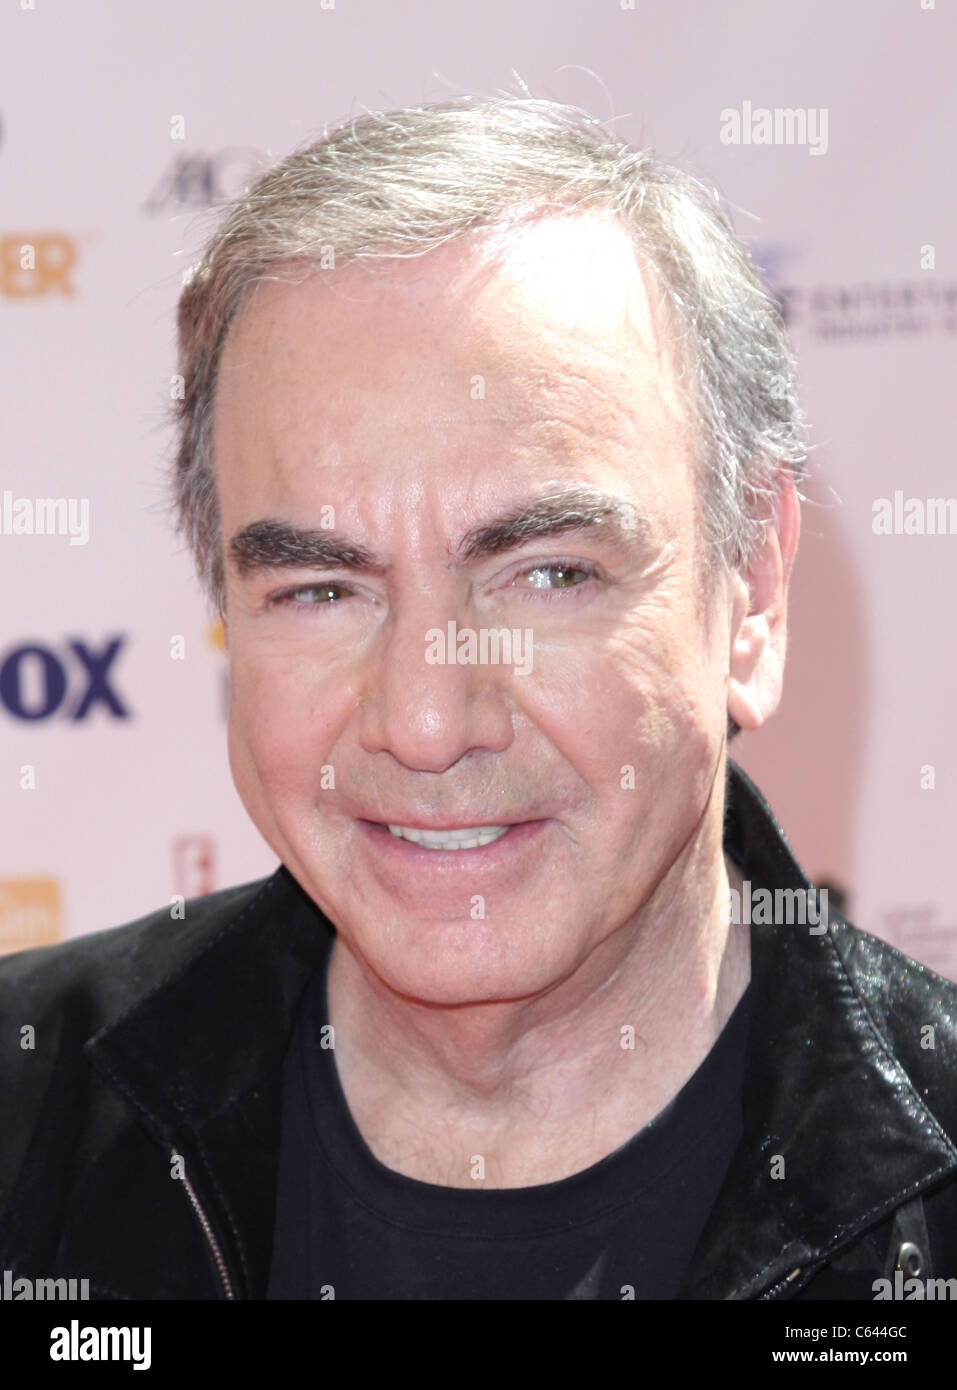 Neil Diamond in attendance for Stand Up To Cancer Fundraiser, Sony Pictures Studios, Los Angeles, CA September 10, 2010. Photo By: Adam Orchon/Everett Collection Stock Photo